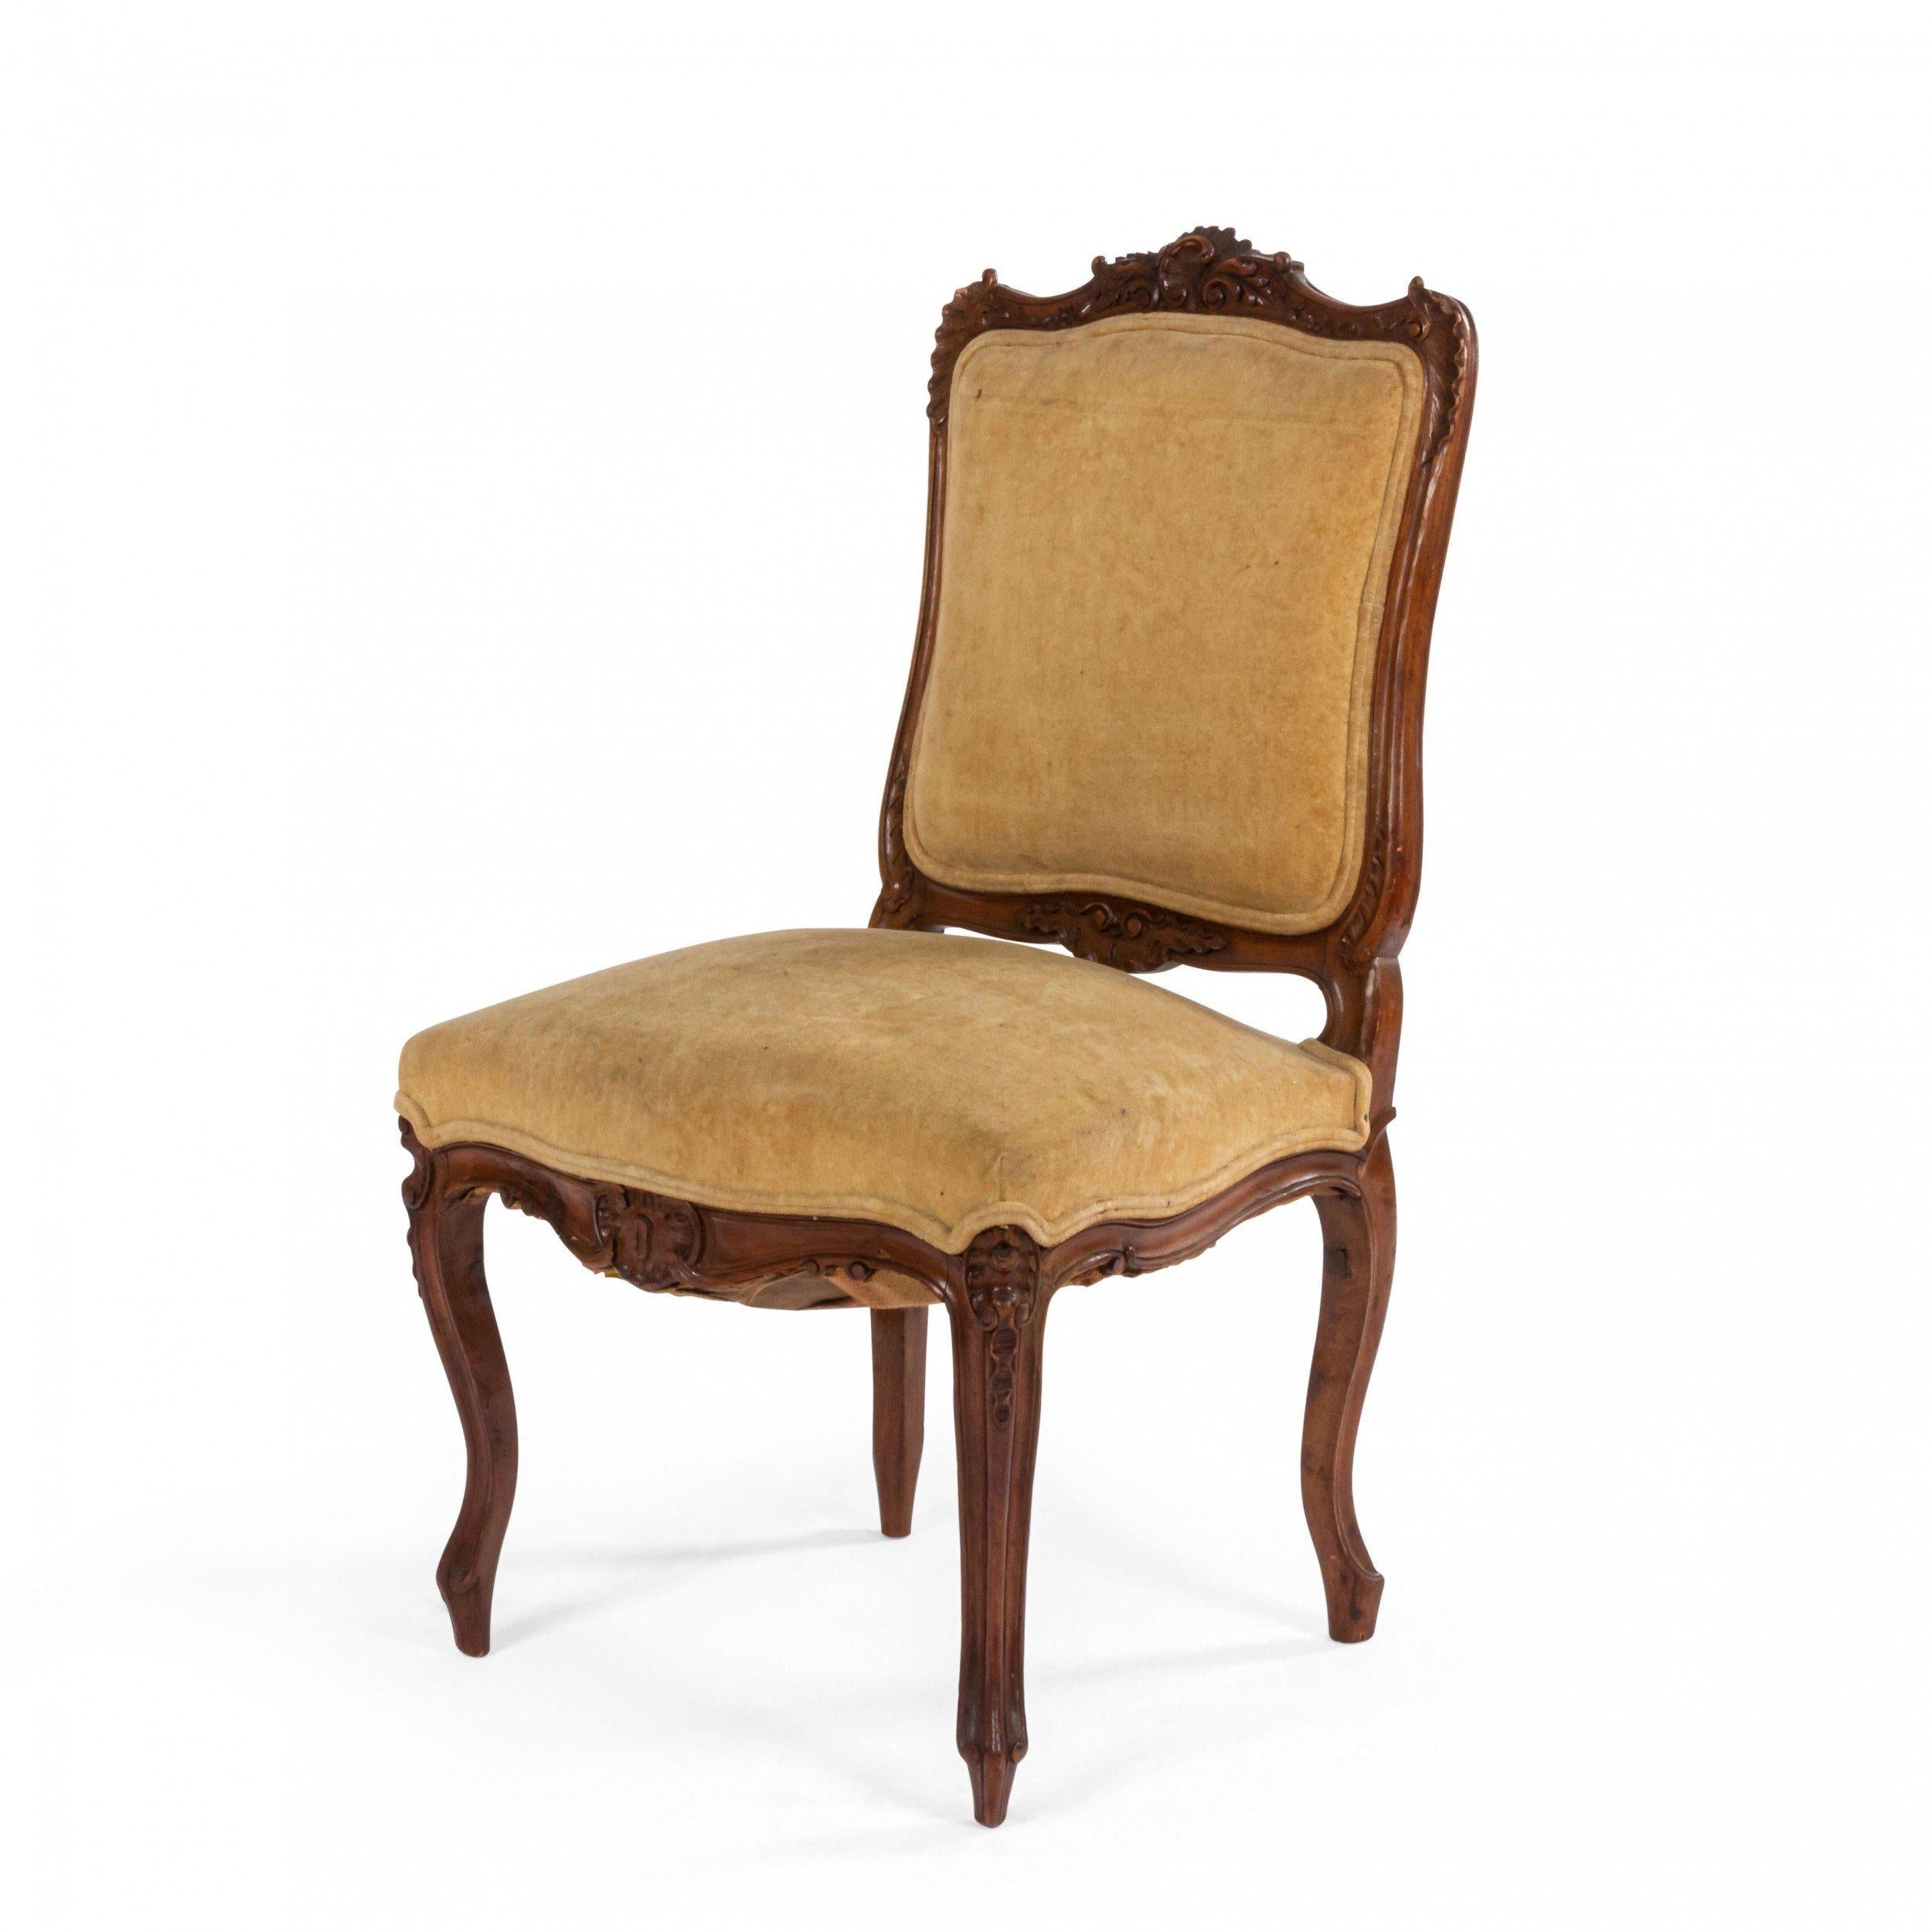 Pair of 20th century French Louis XV-style walnut side chairs with beige velvet upholstery.